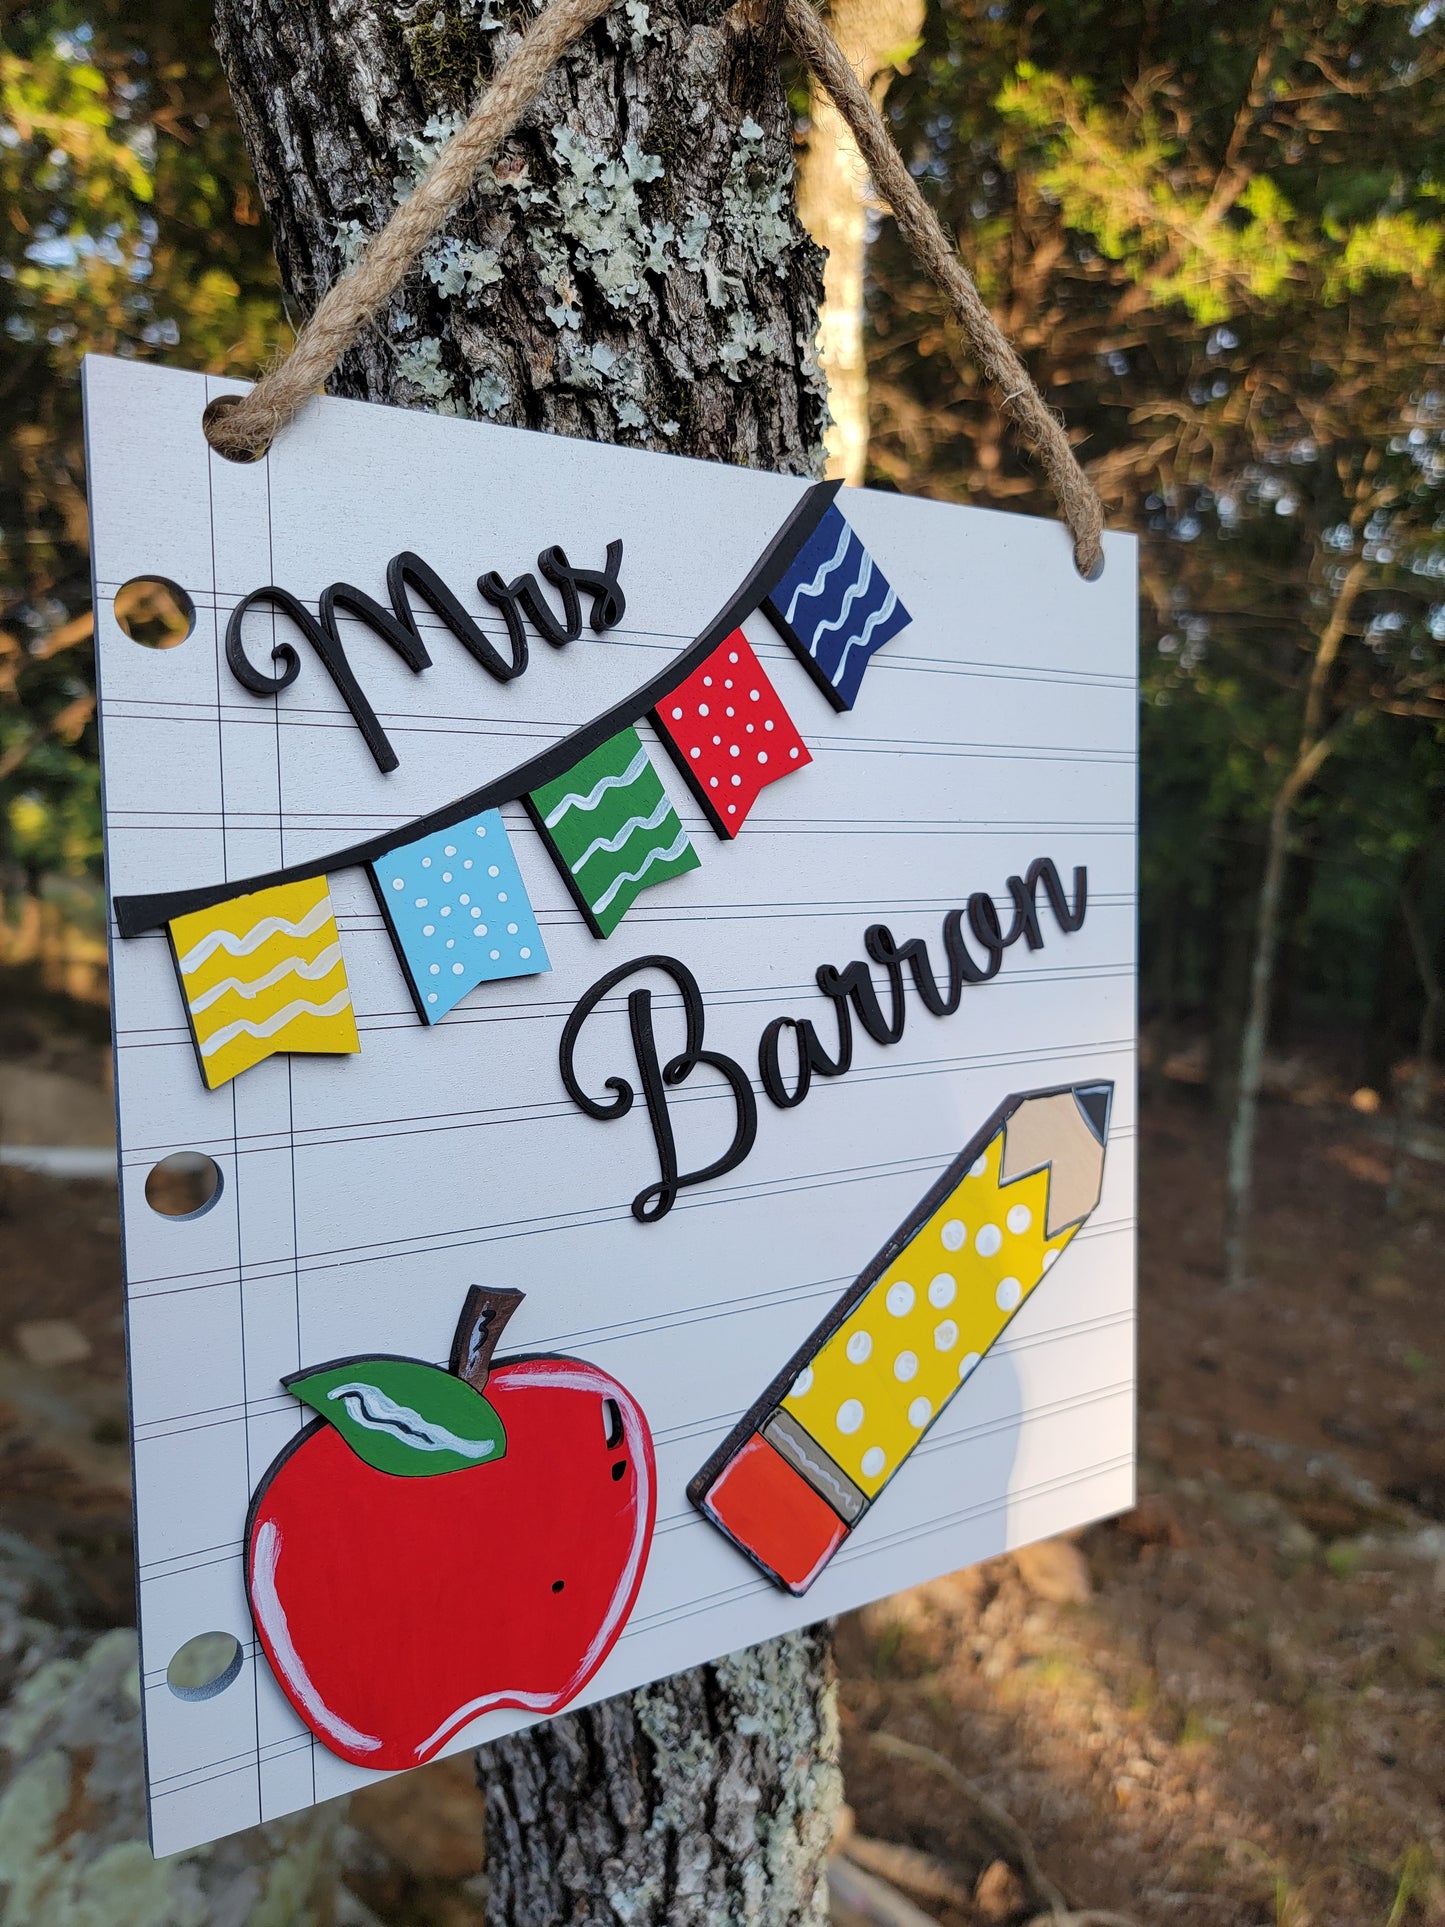 Banners, Apples and Pencils - Oh My!